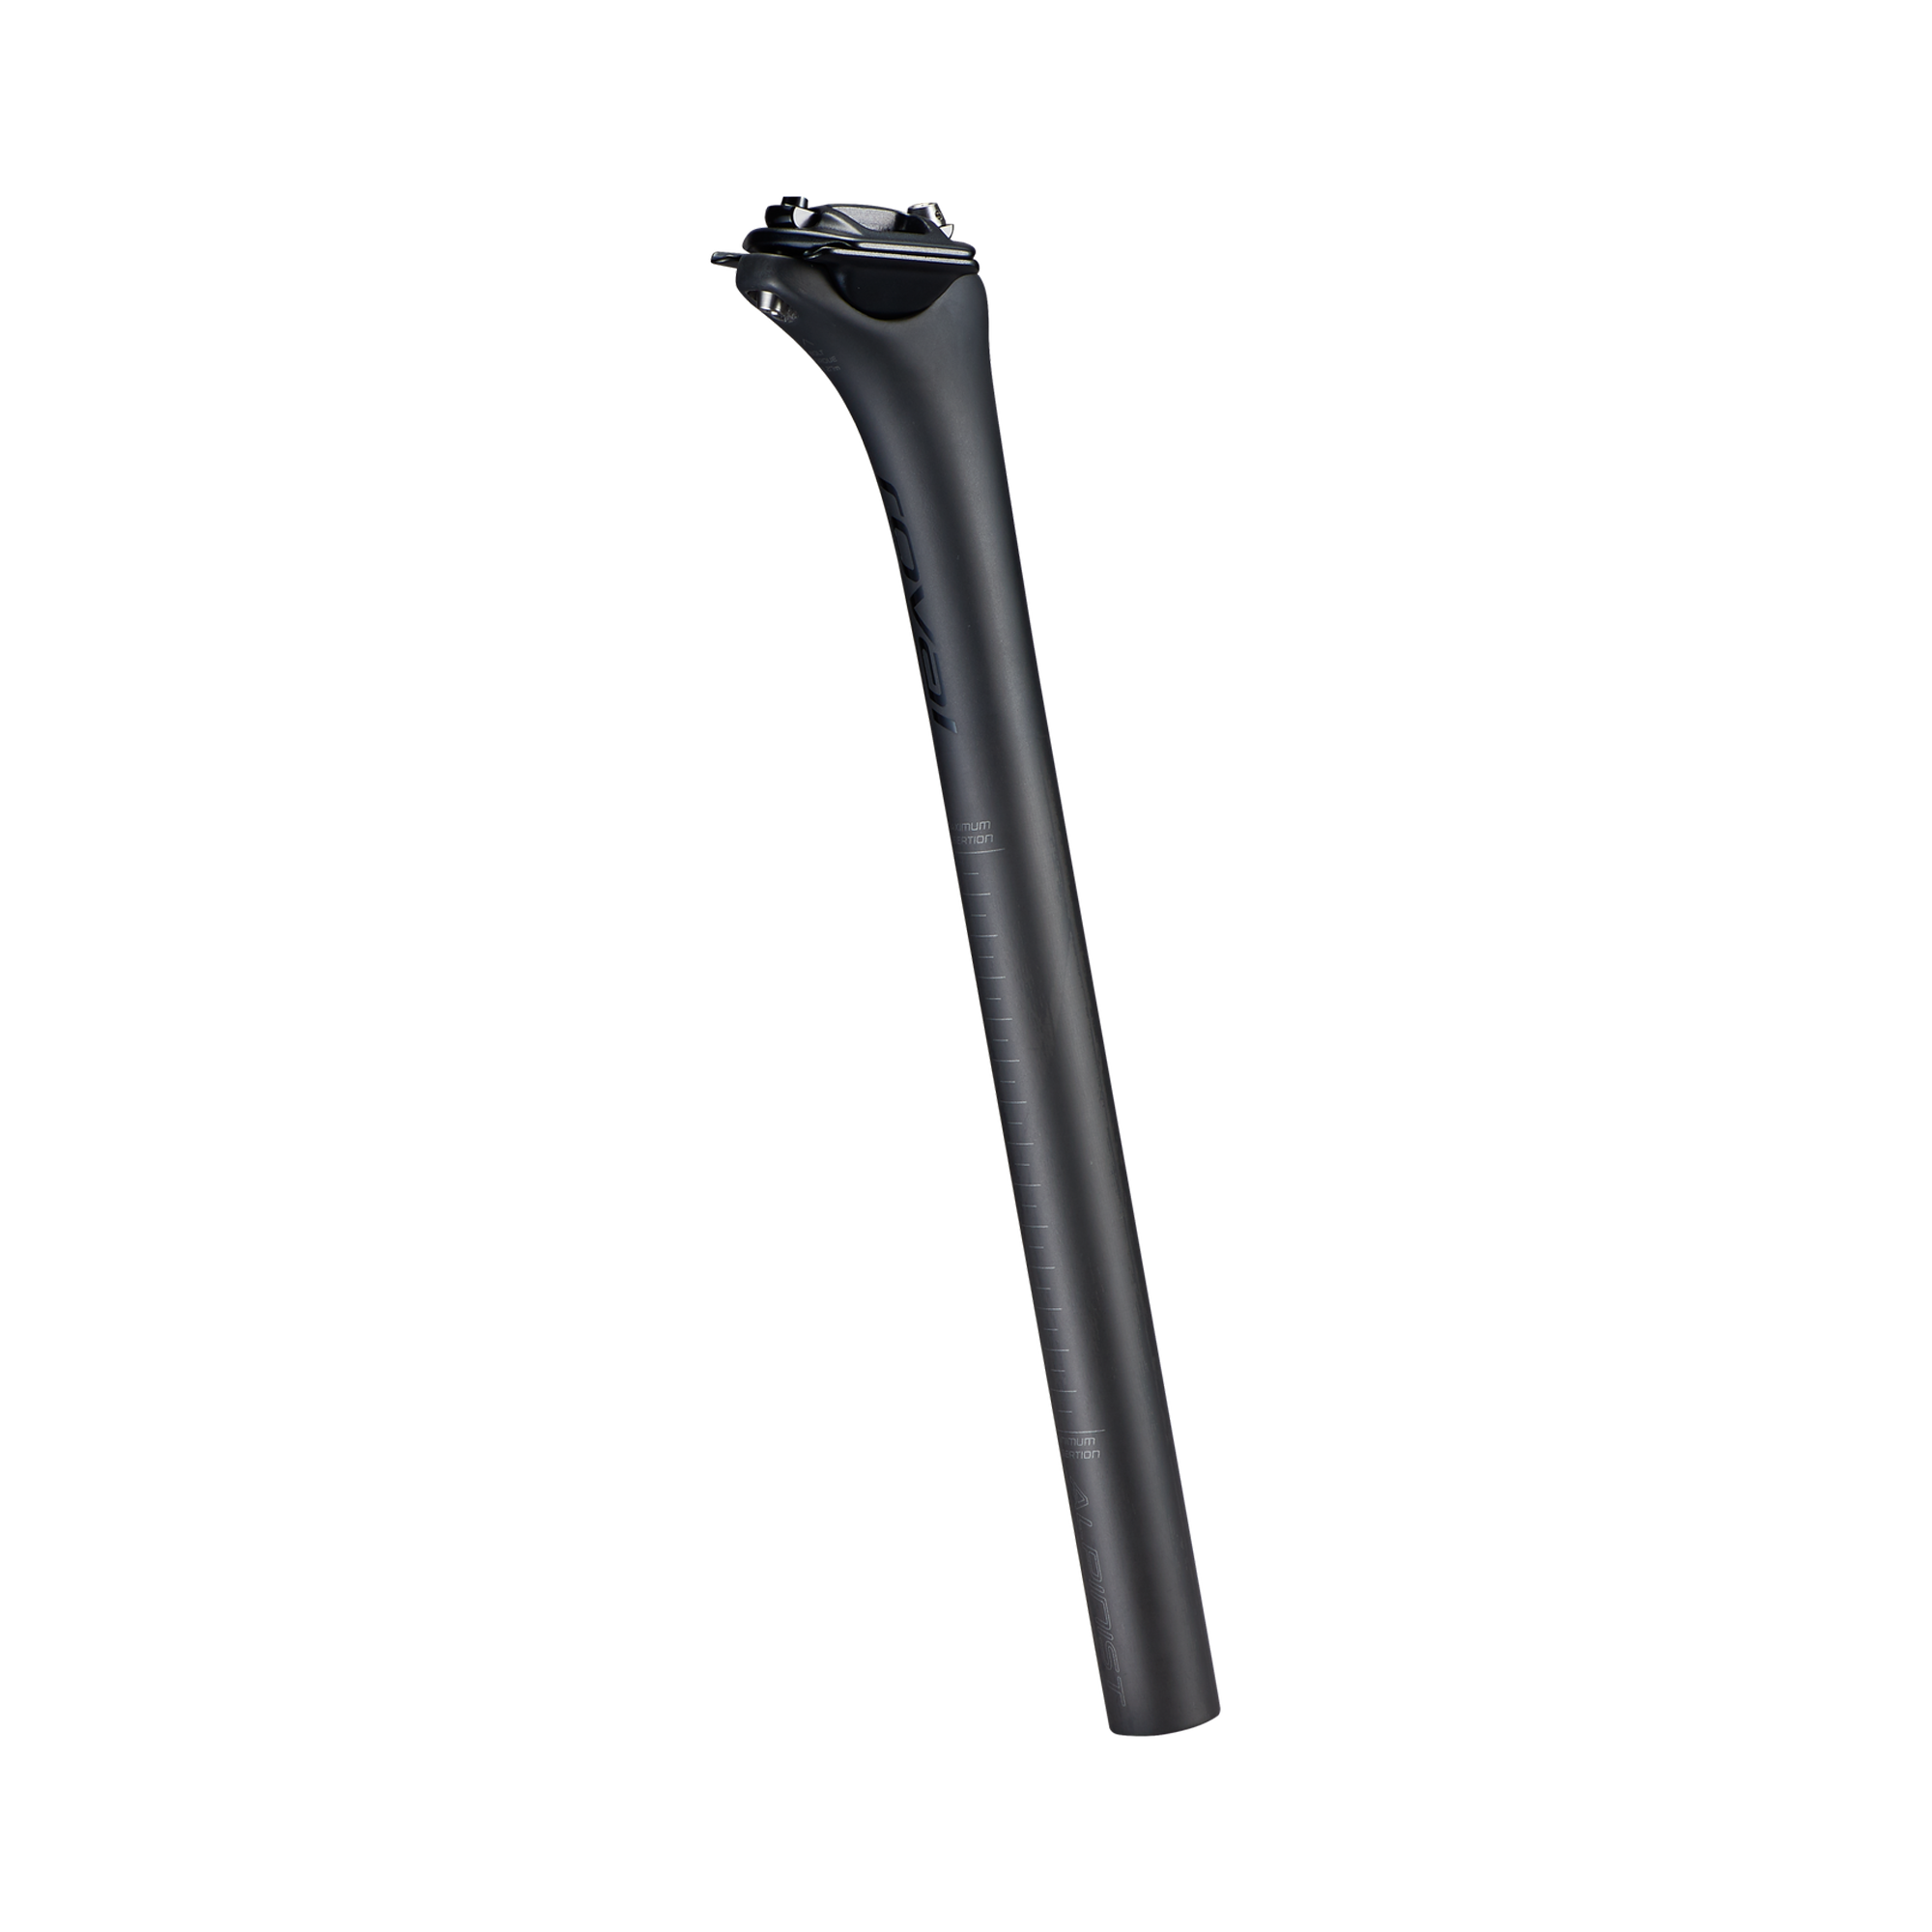 ROVAL ALPINIST CARBON POST specializeds-wo